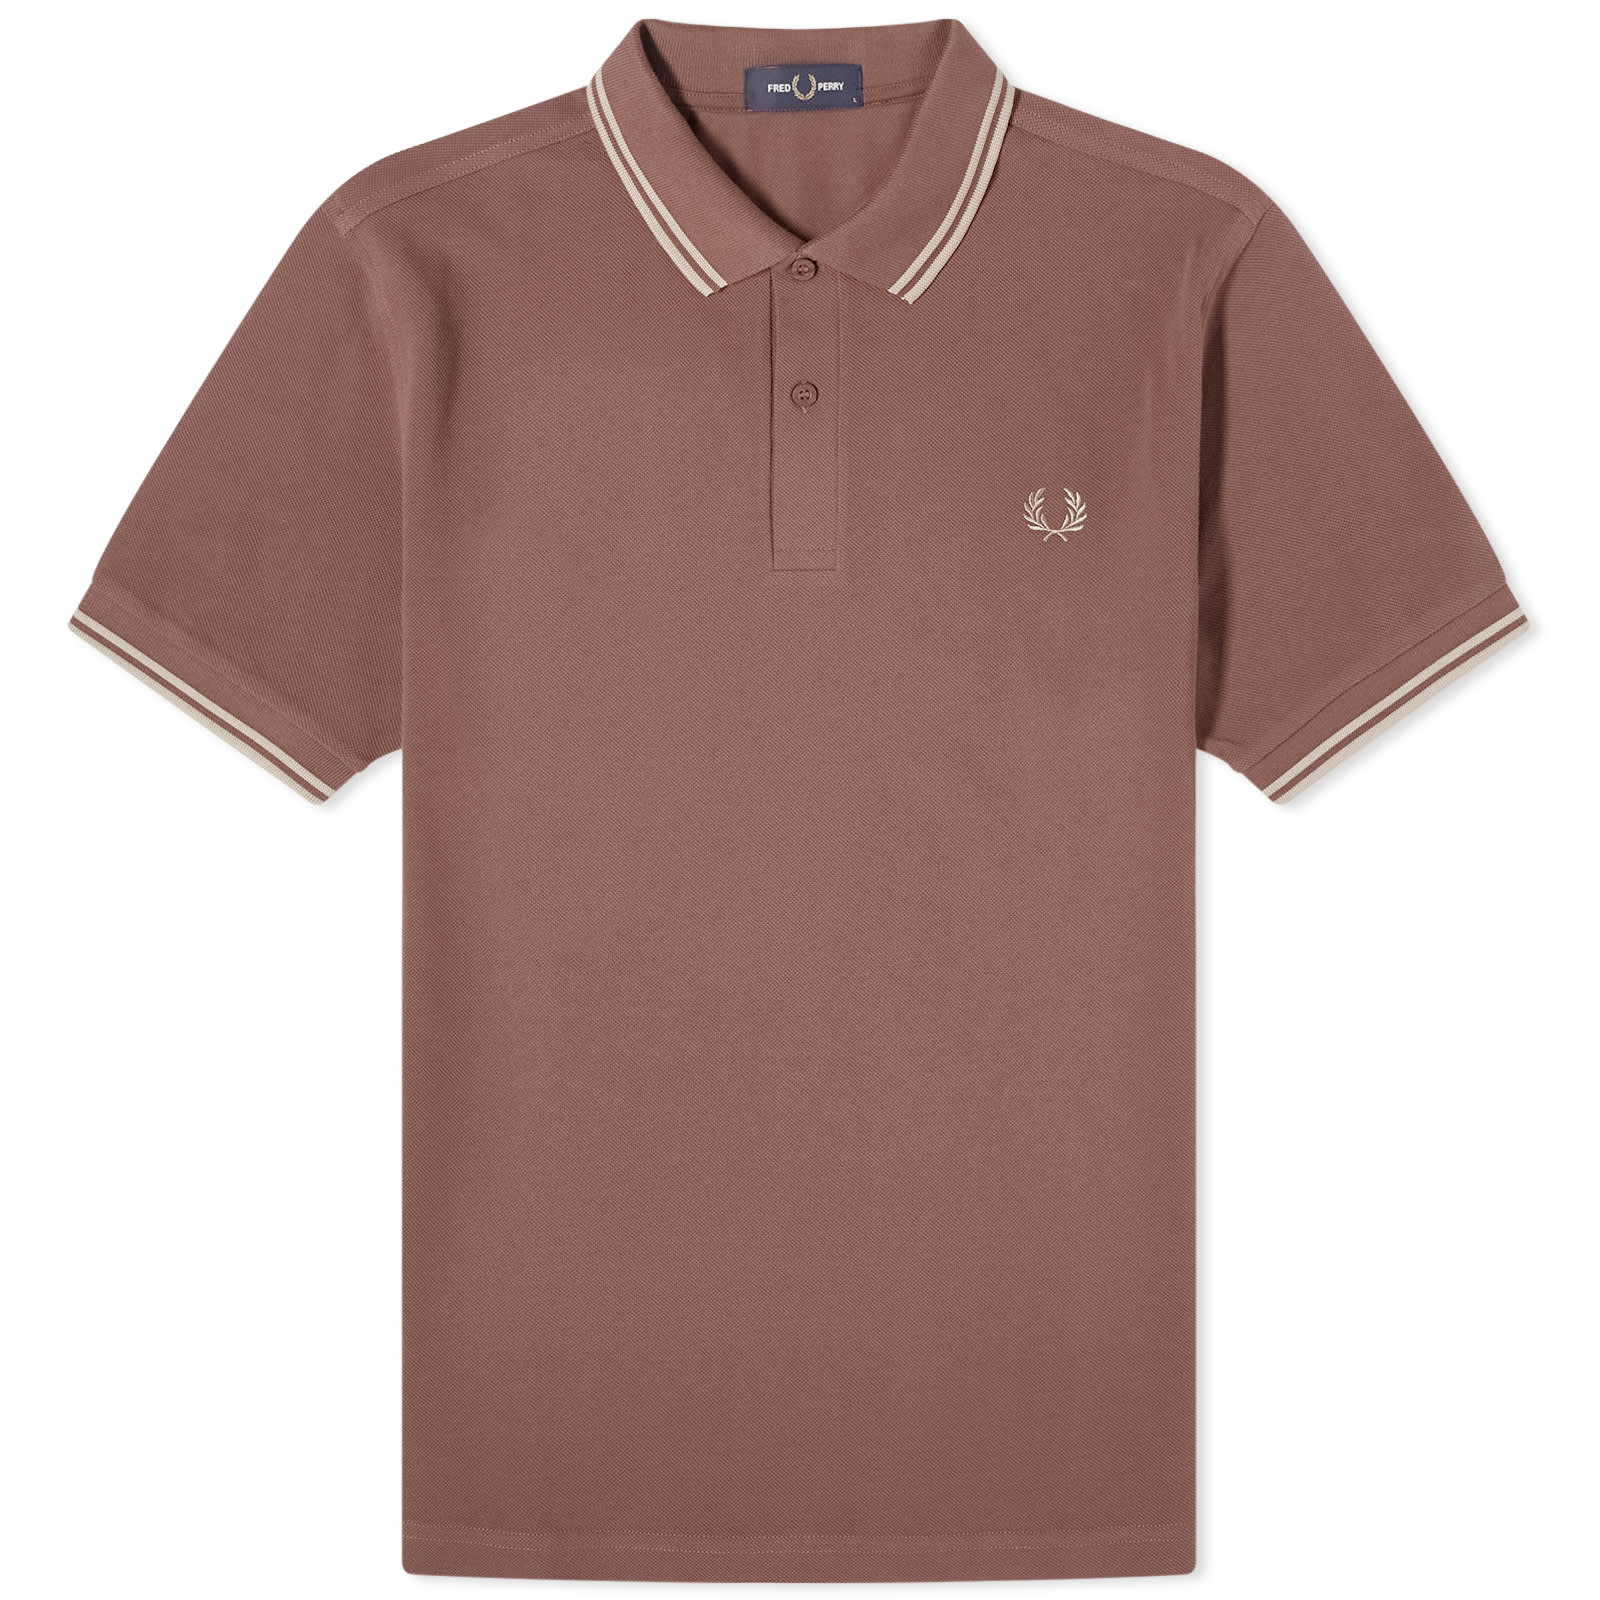 Поло Fred Perry Twin Tipped, цвет Brick & Warm Grey поло fred perry twin tipped цвет grey stone